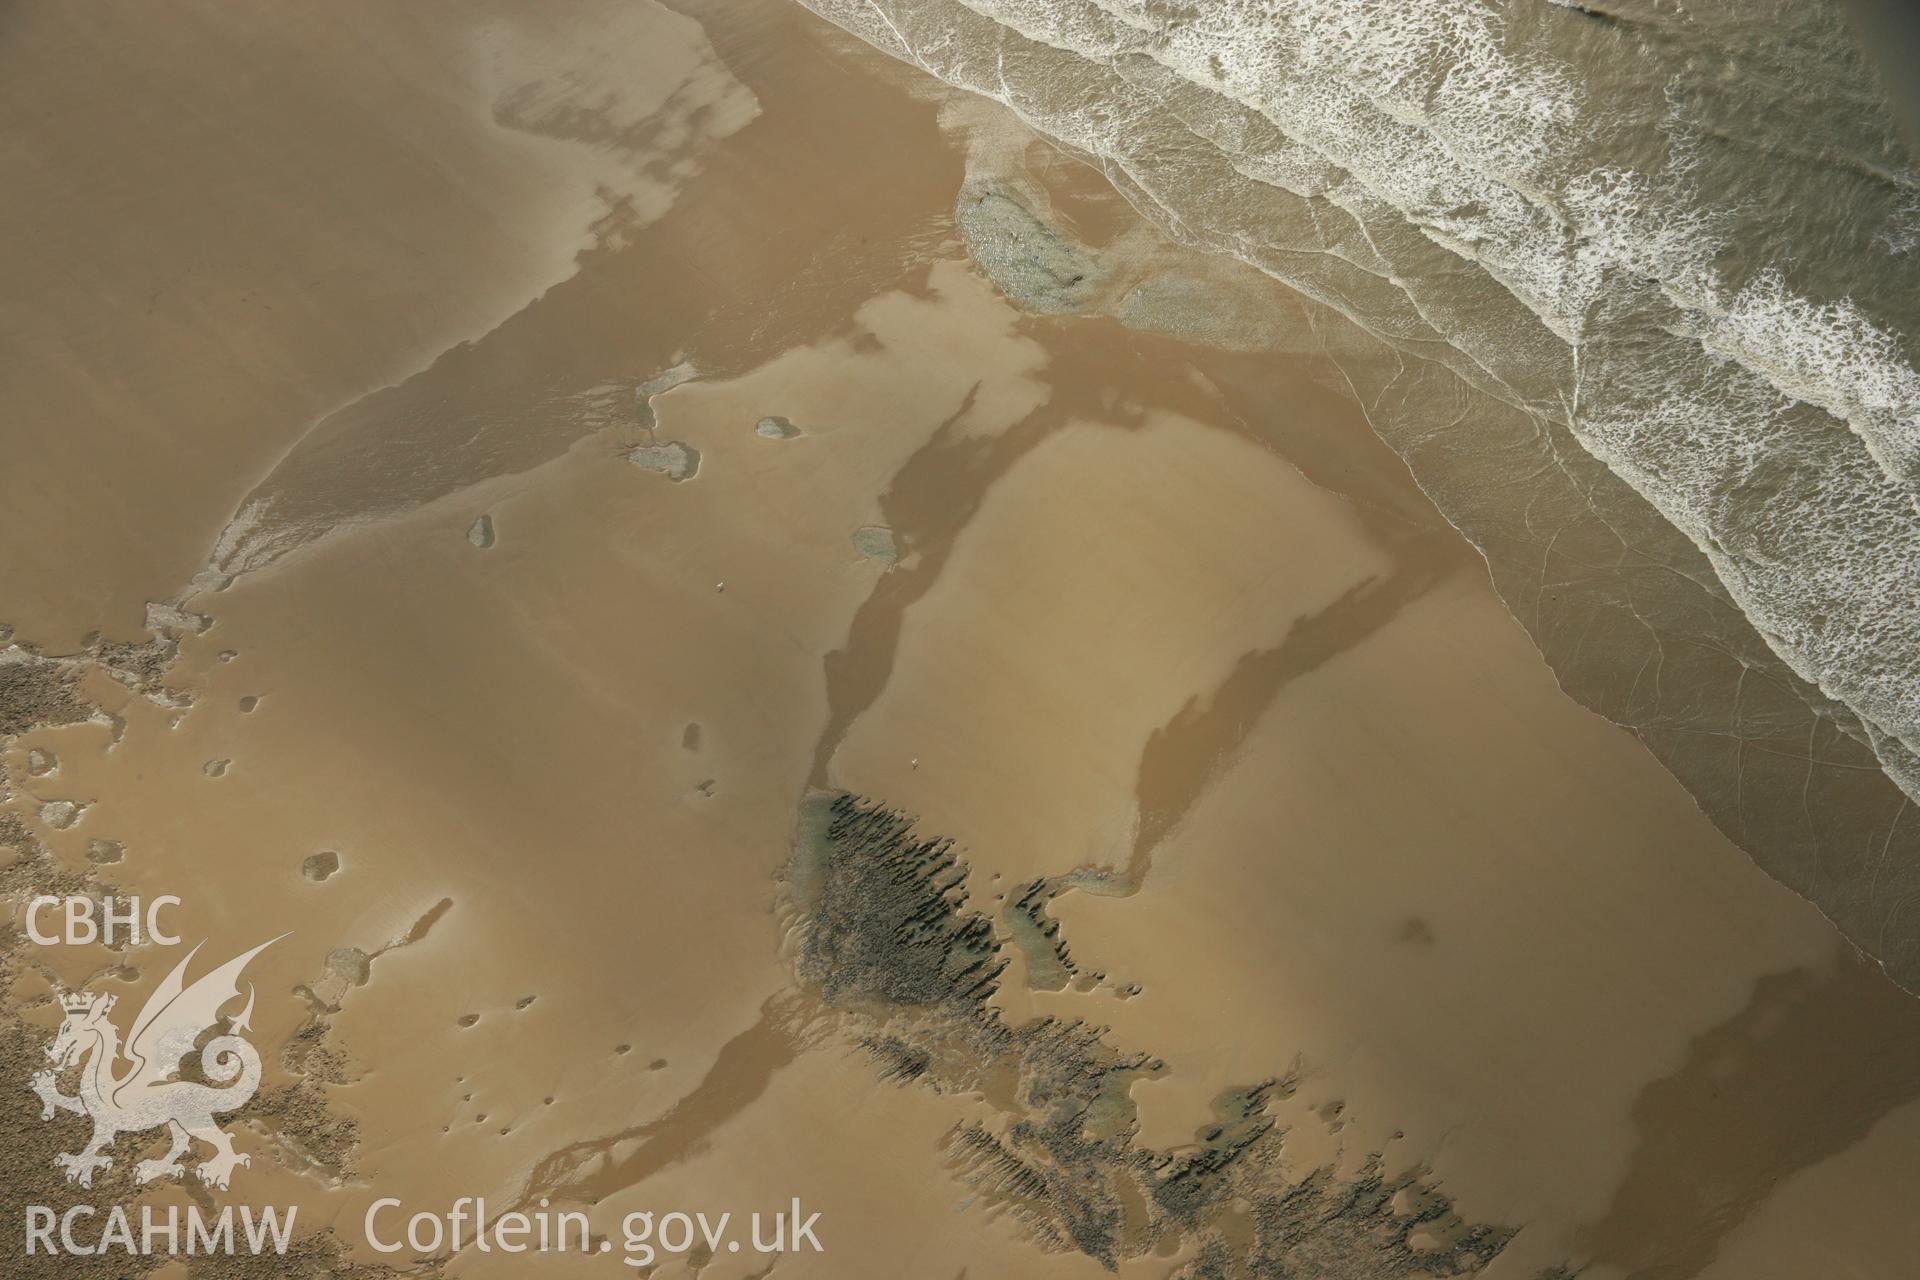 RCAHMW colour oblique aerial photograph of Gwely'r Misgl Wreck on Kenfig Sands. Taken on 16 March 2007 by Toby Driver